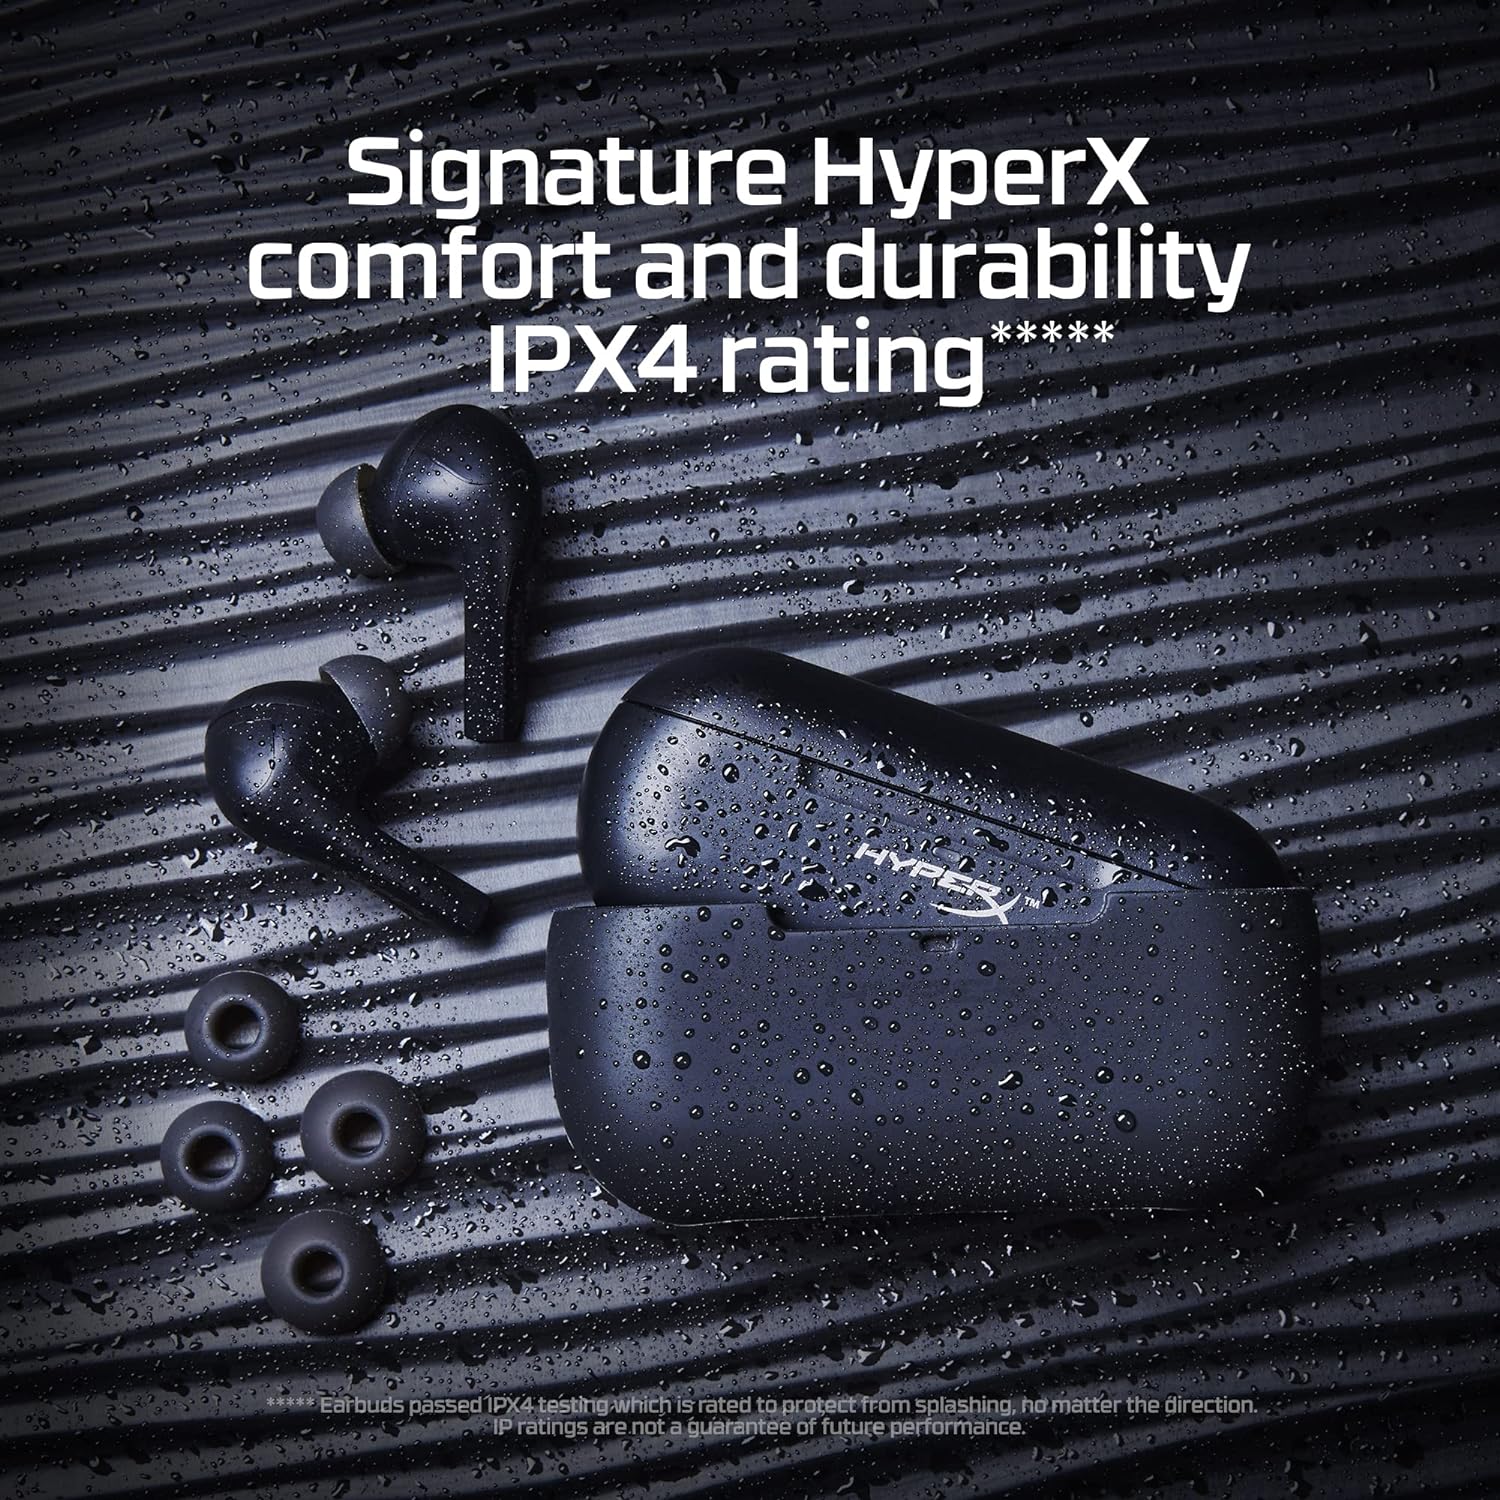 HyperX Cloud Mix Buds - True Wireless Earbuds, Low Latency 2.4GHz Gaming Mode, Bluetooth Compatible, Long-Lasting Battery, 12mm Drivers, 3 Silicone Ear Tip Sizes, DTS Headphone HyperX Cloud Mix Buds Wireless Earbuds